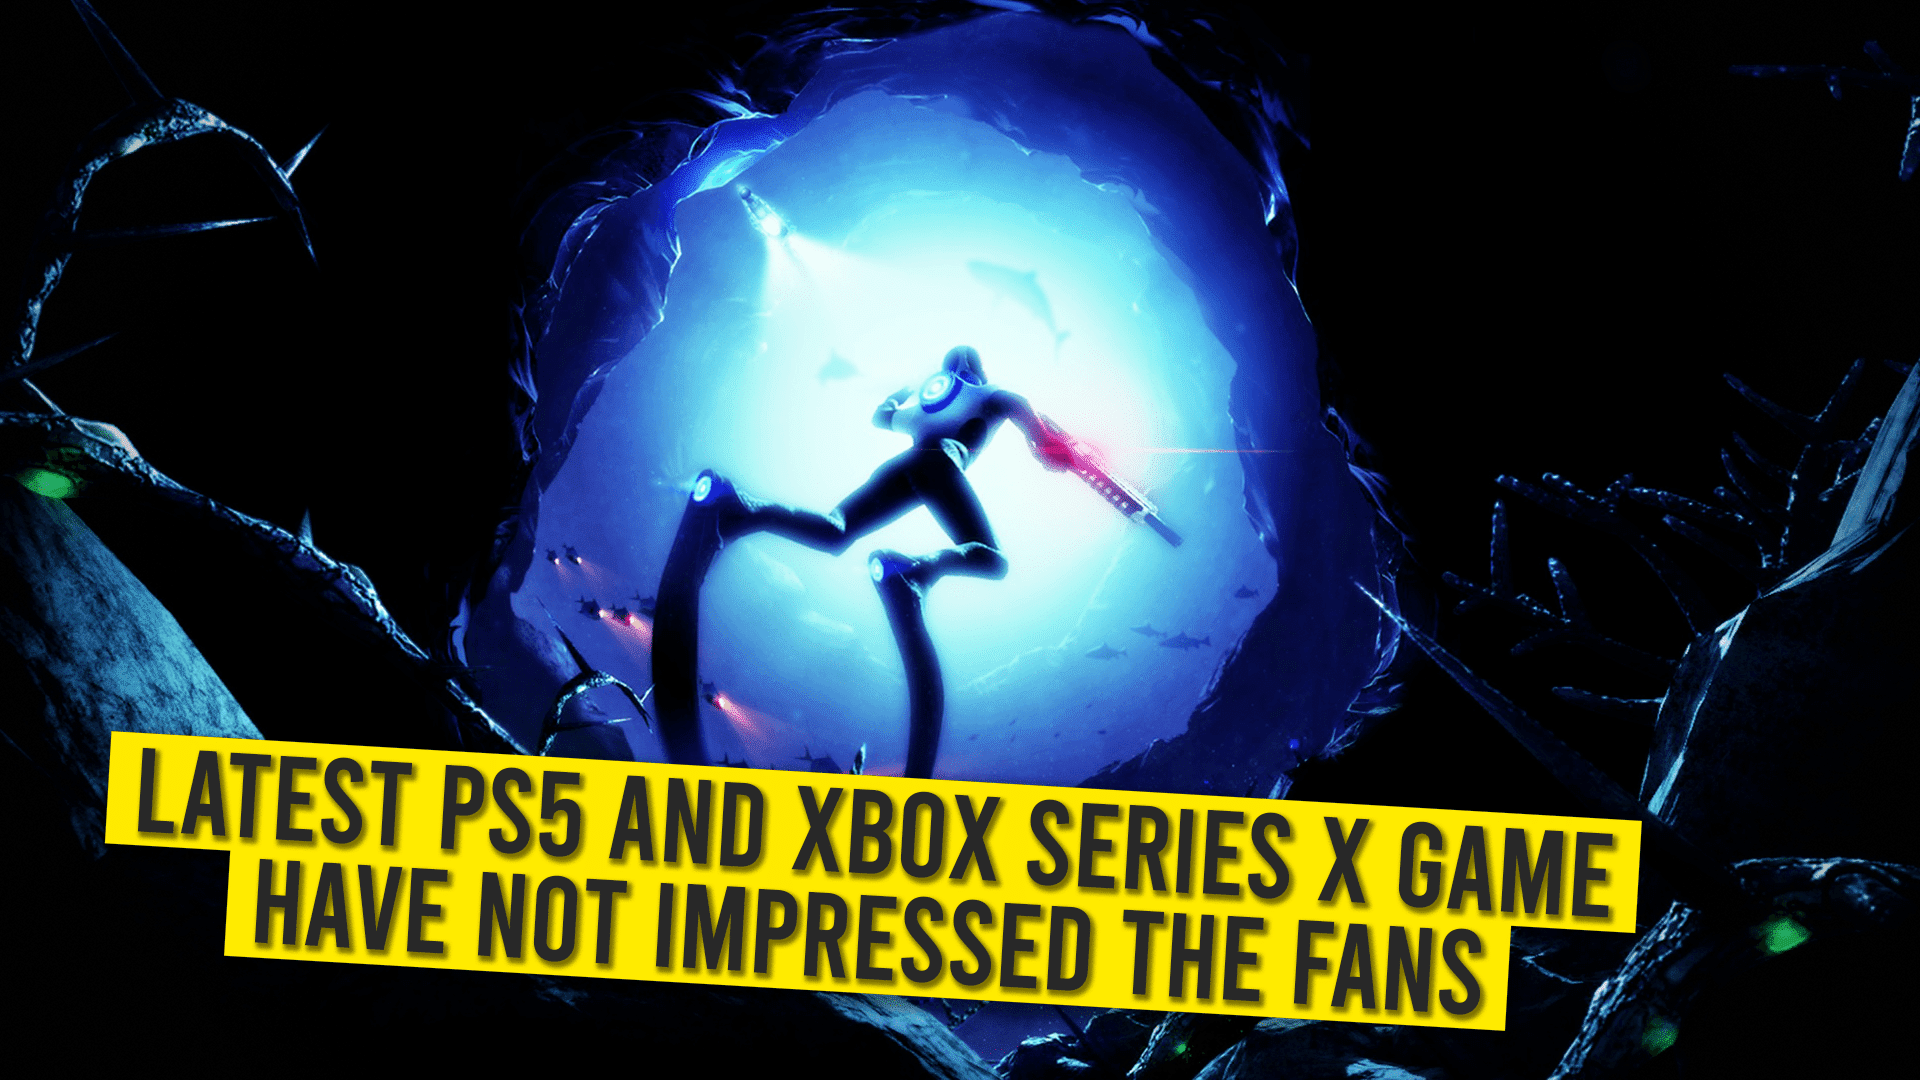 Latest PS5 and Xbox Series X Game Has Not Impressed The Fans